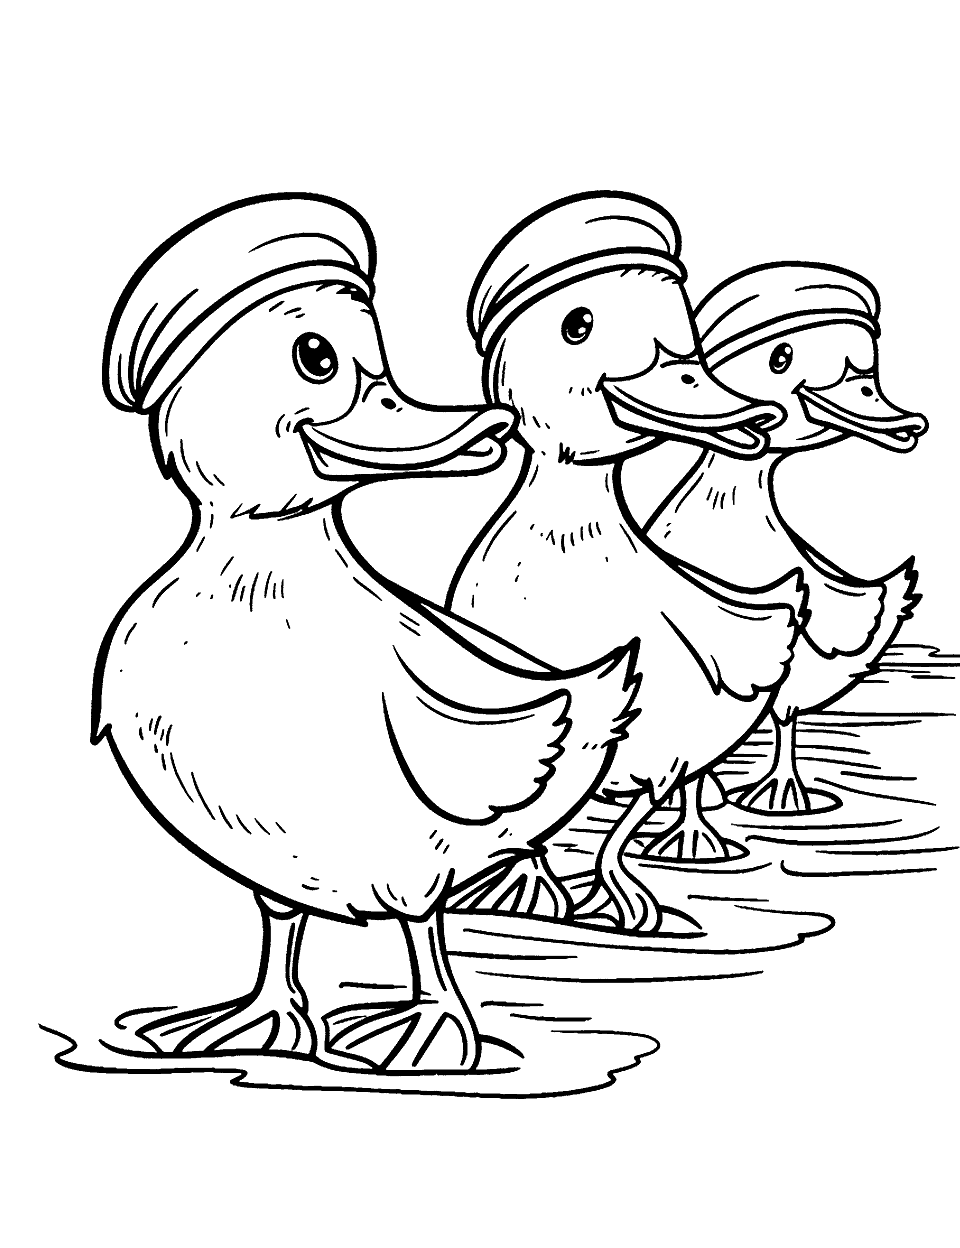 Kindergarten Duck Parade Coloring Page - A line of cartoon ducks wearing hats, marching.